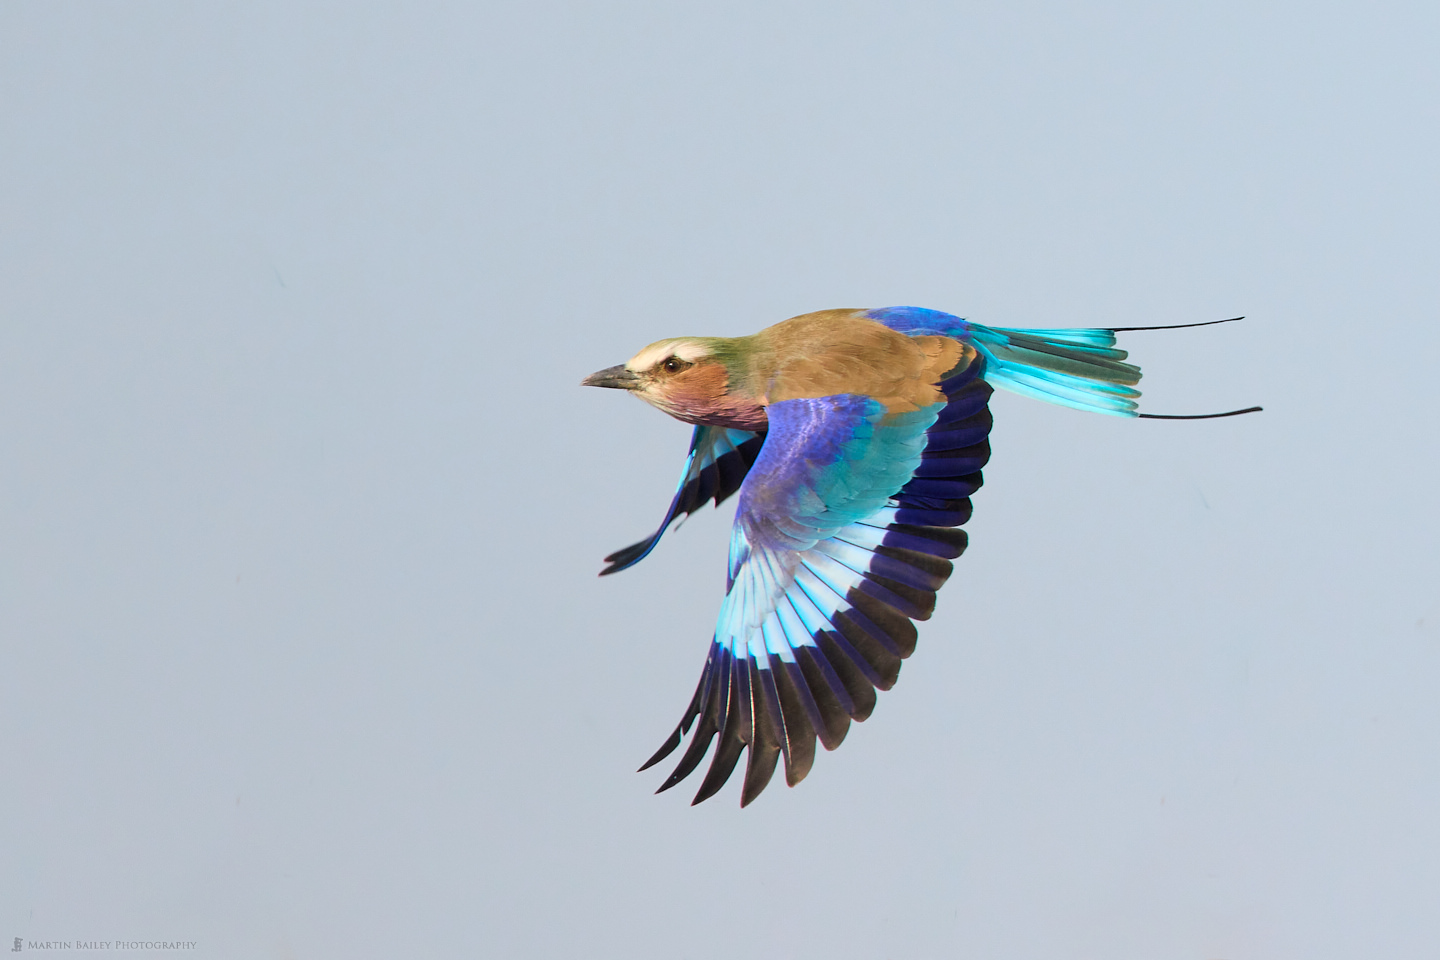 Lilac-Breasted Roller in Flight